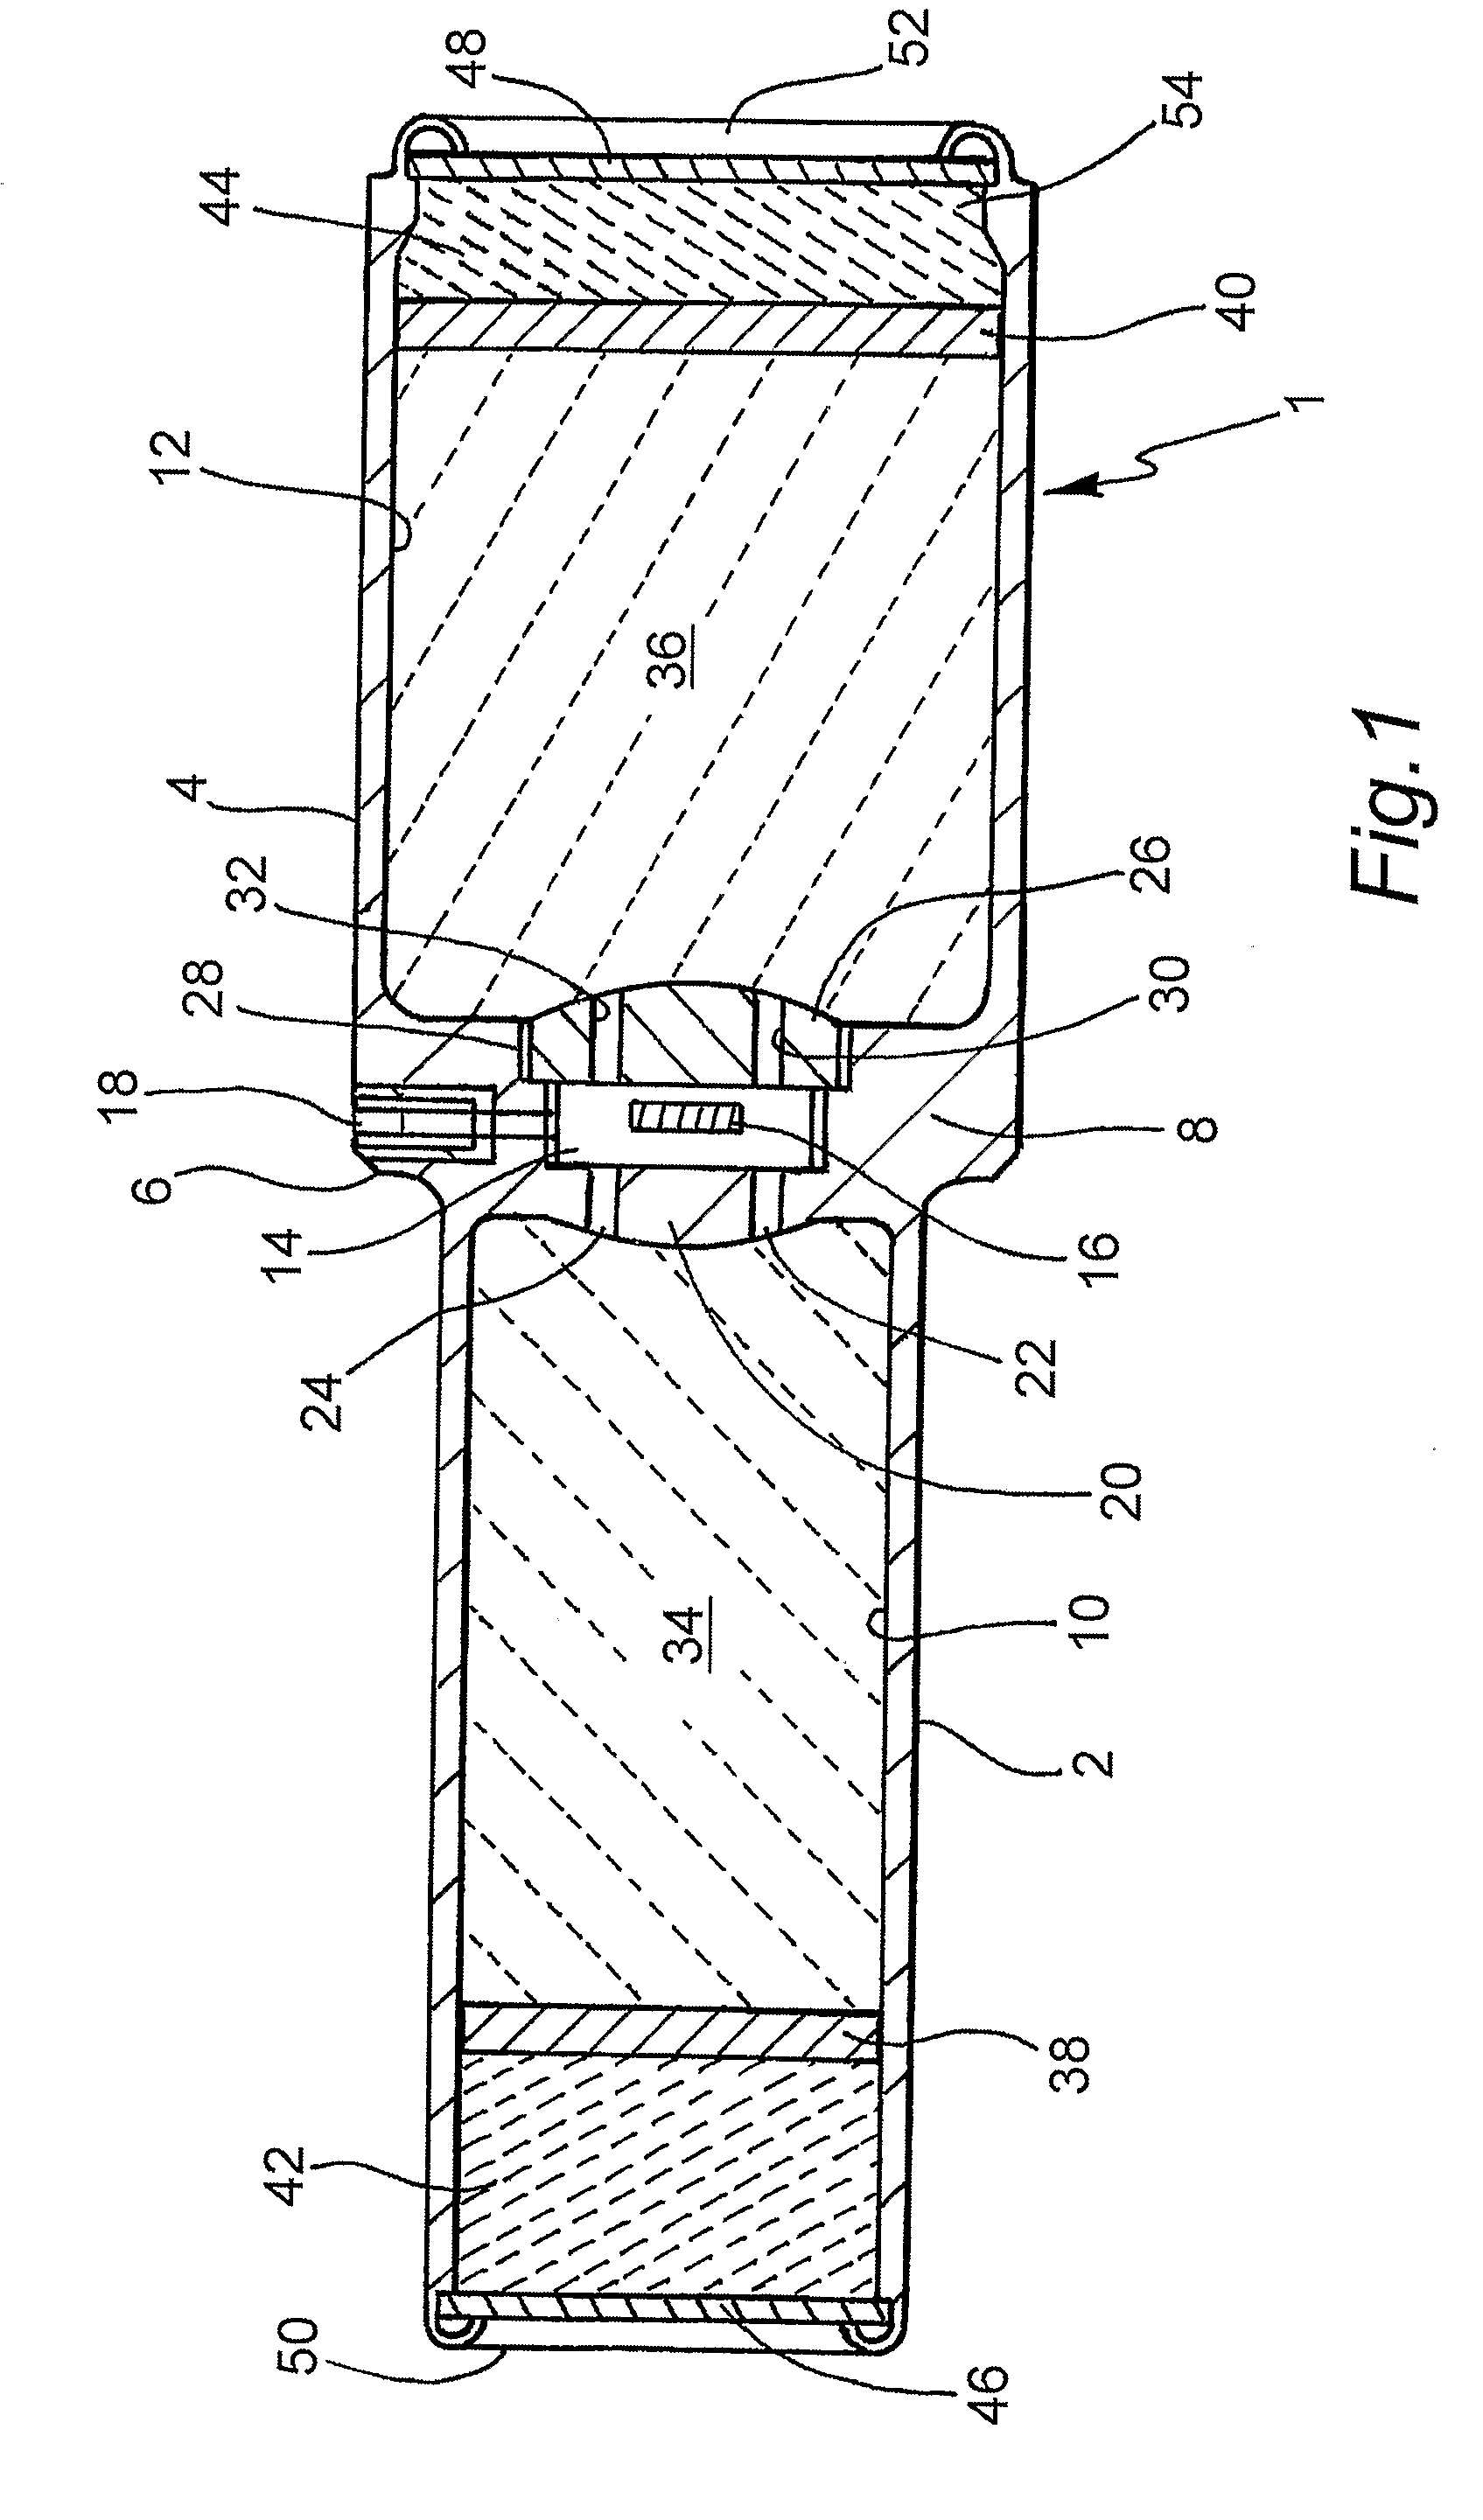 Devices for firing a projectile